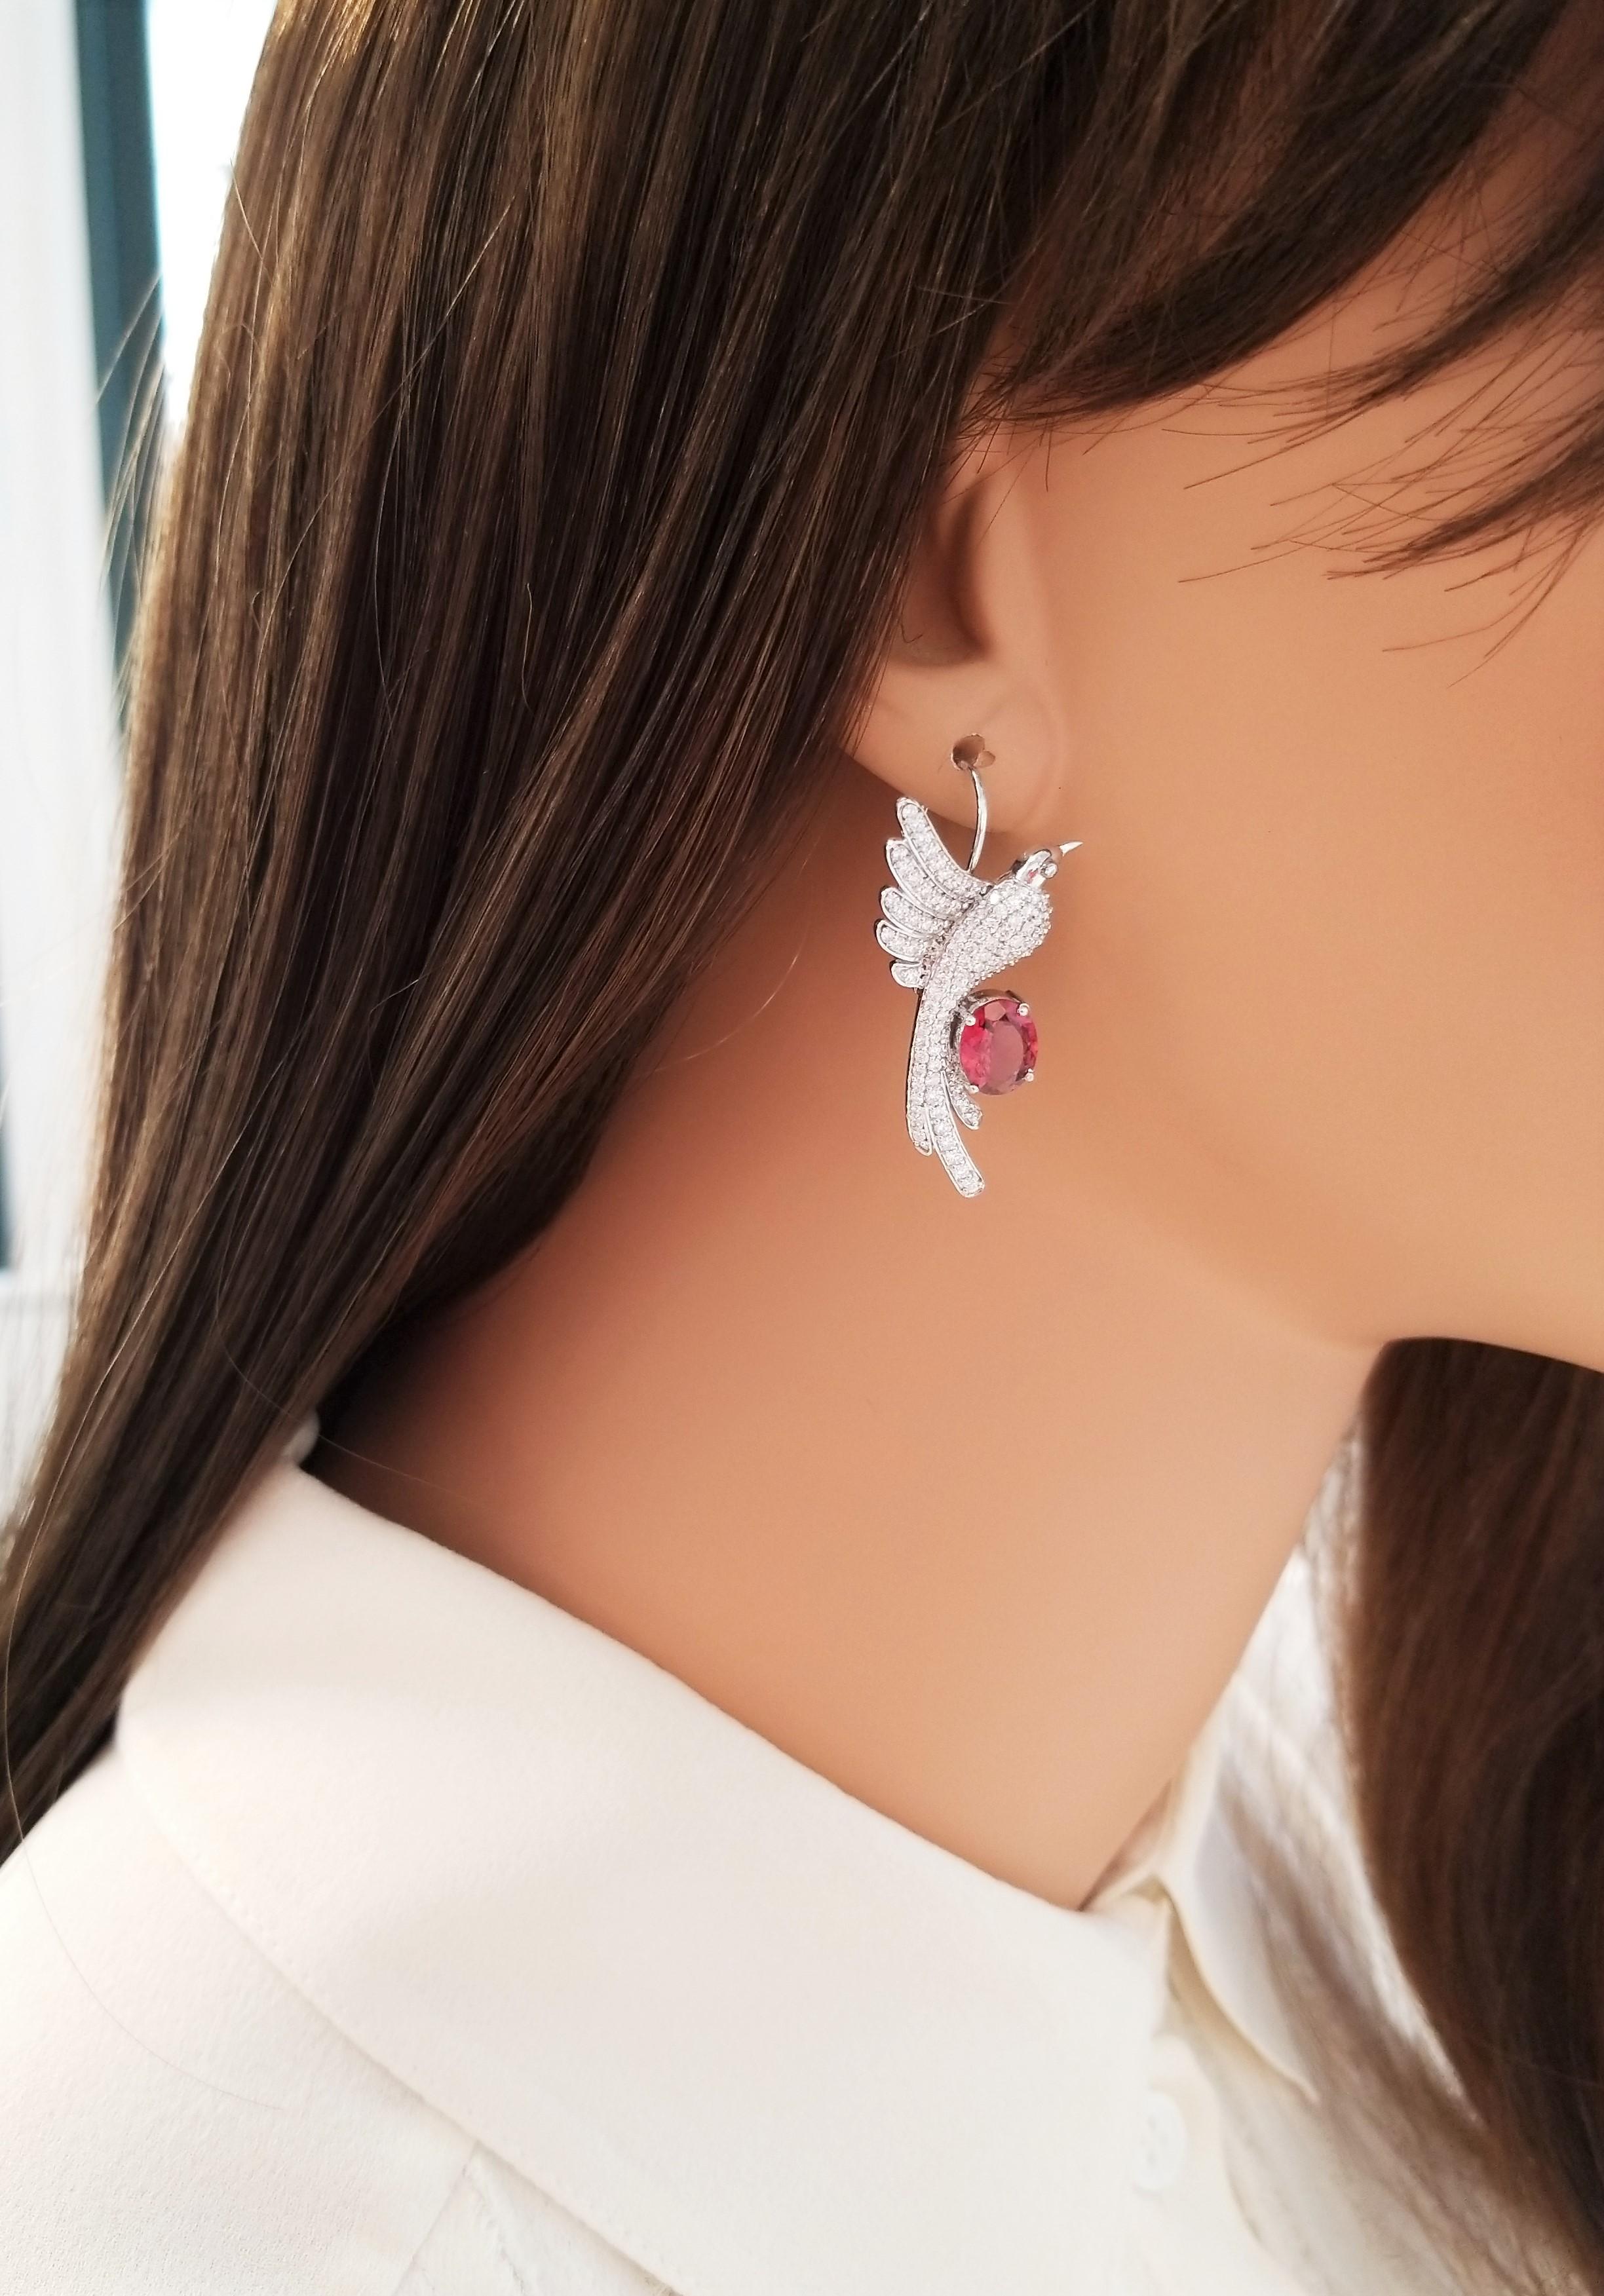 These are flying hummingbirds filled with 226 sparkling round brilliant cut diamonds, pave-set, in a brilliant display totaling 1.84 carats. Oval-shaped vibrant raspberry rubellite tourmalines are prong set with the birds perched atop totaling 2.90